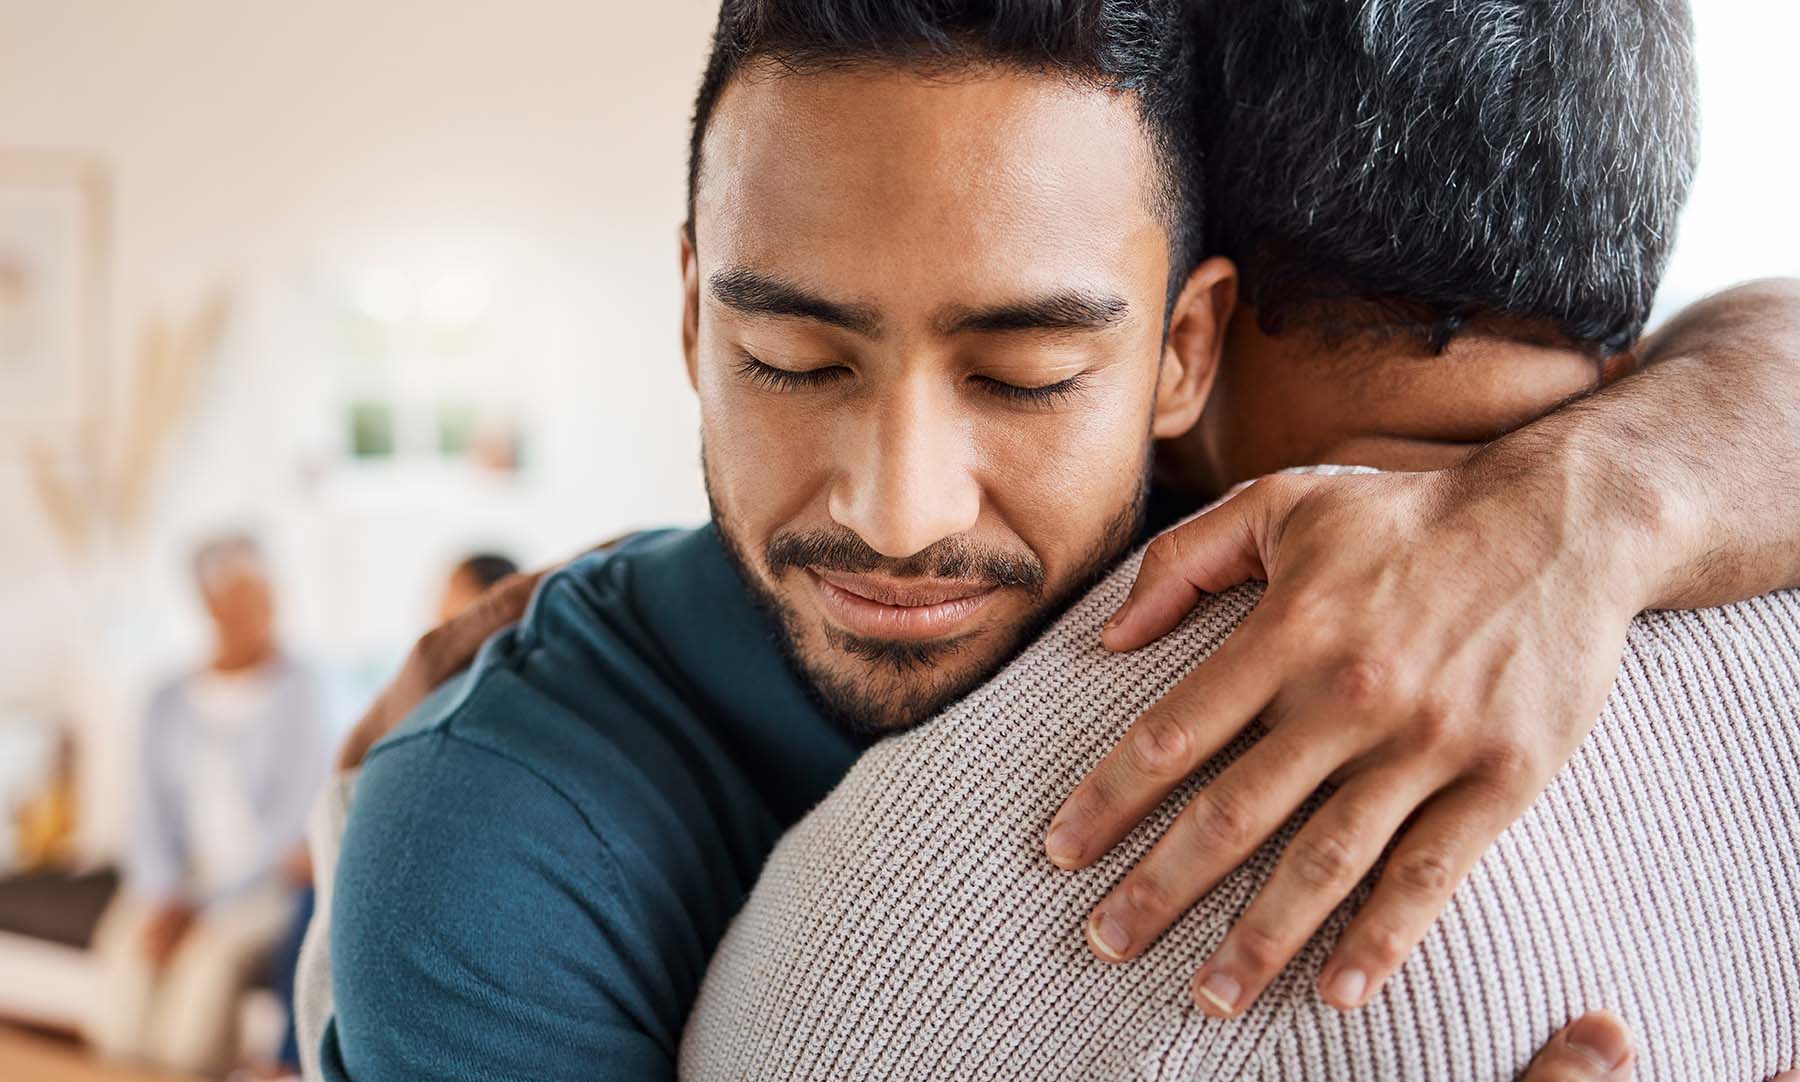 Young Hispanic man hugs an older man, possibly his father